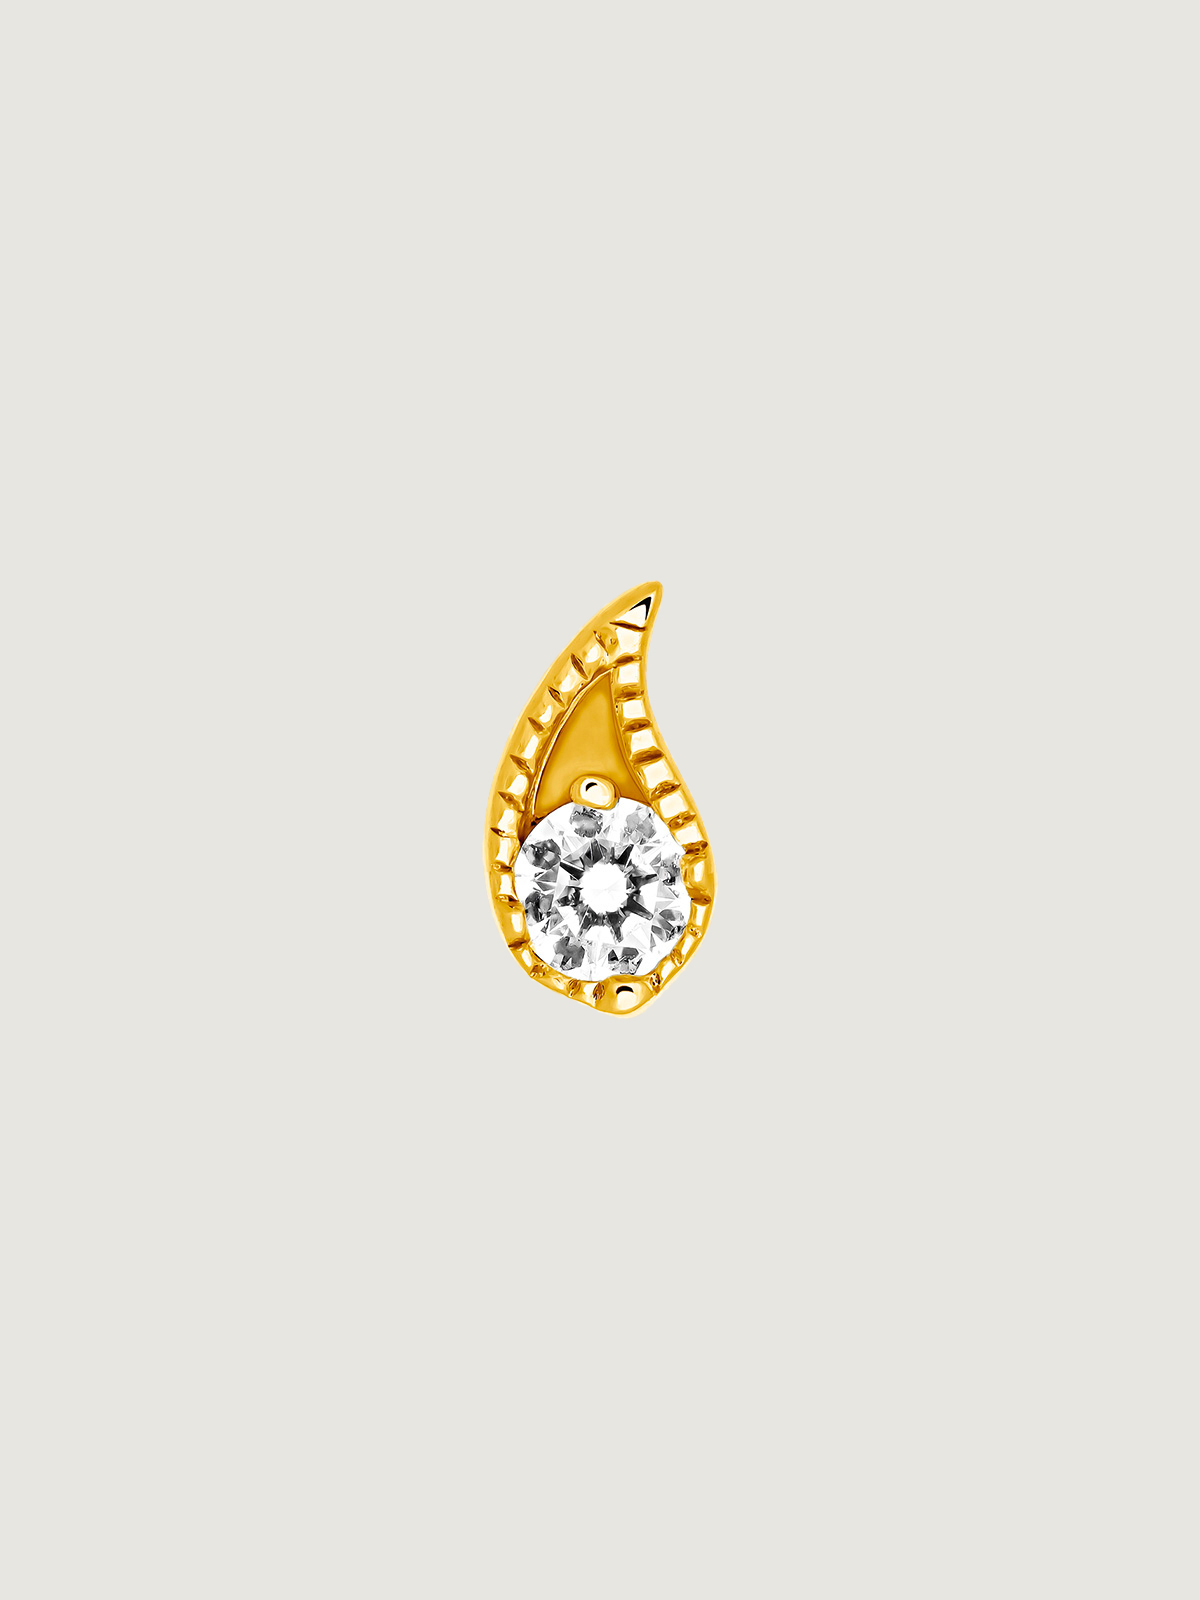 Individual 9K yellow gold earring in the shape of a butterfly with a diamond.